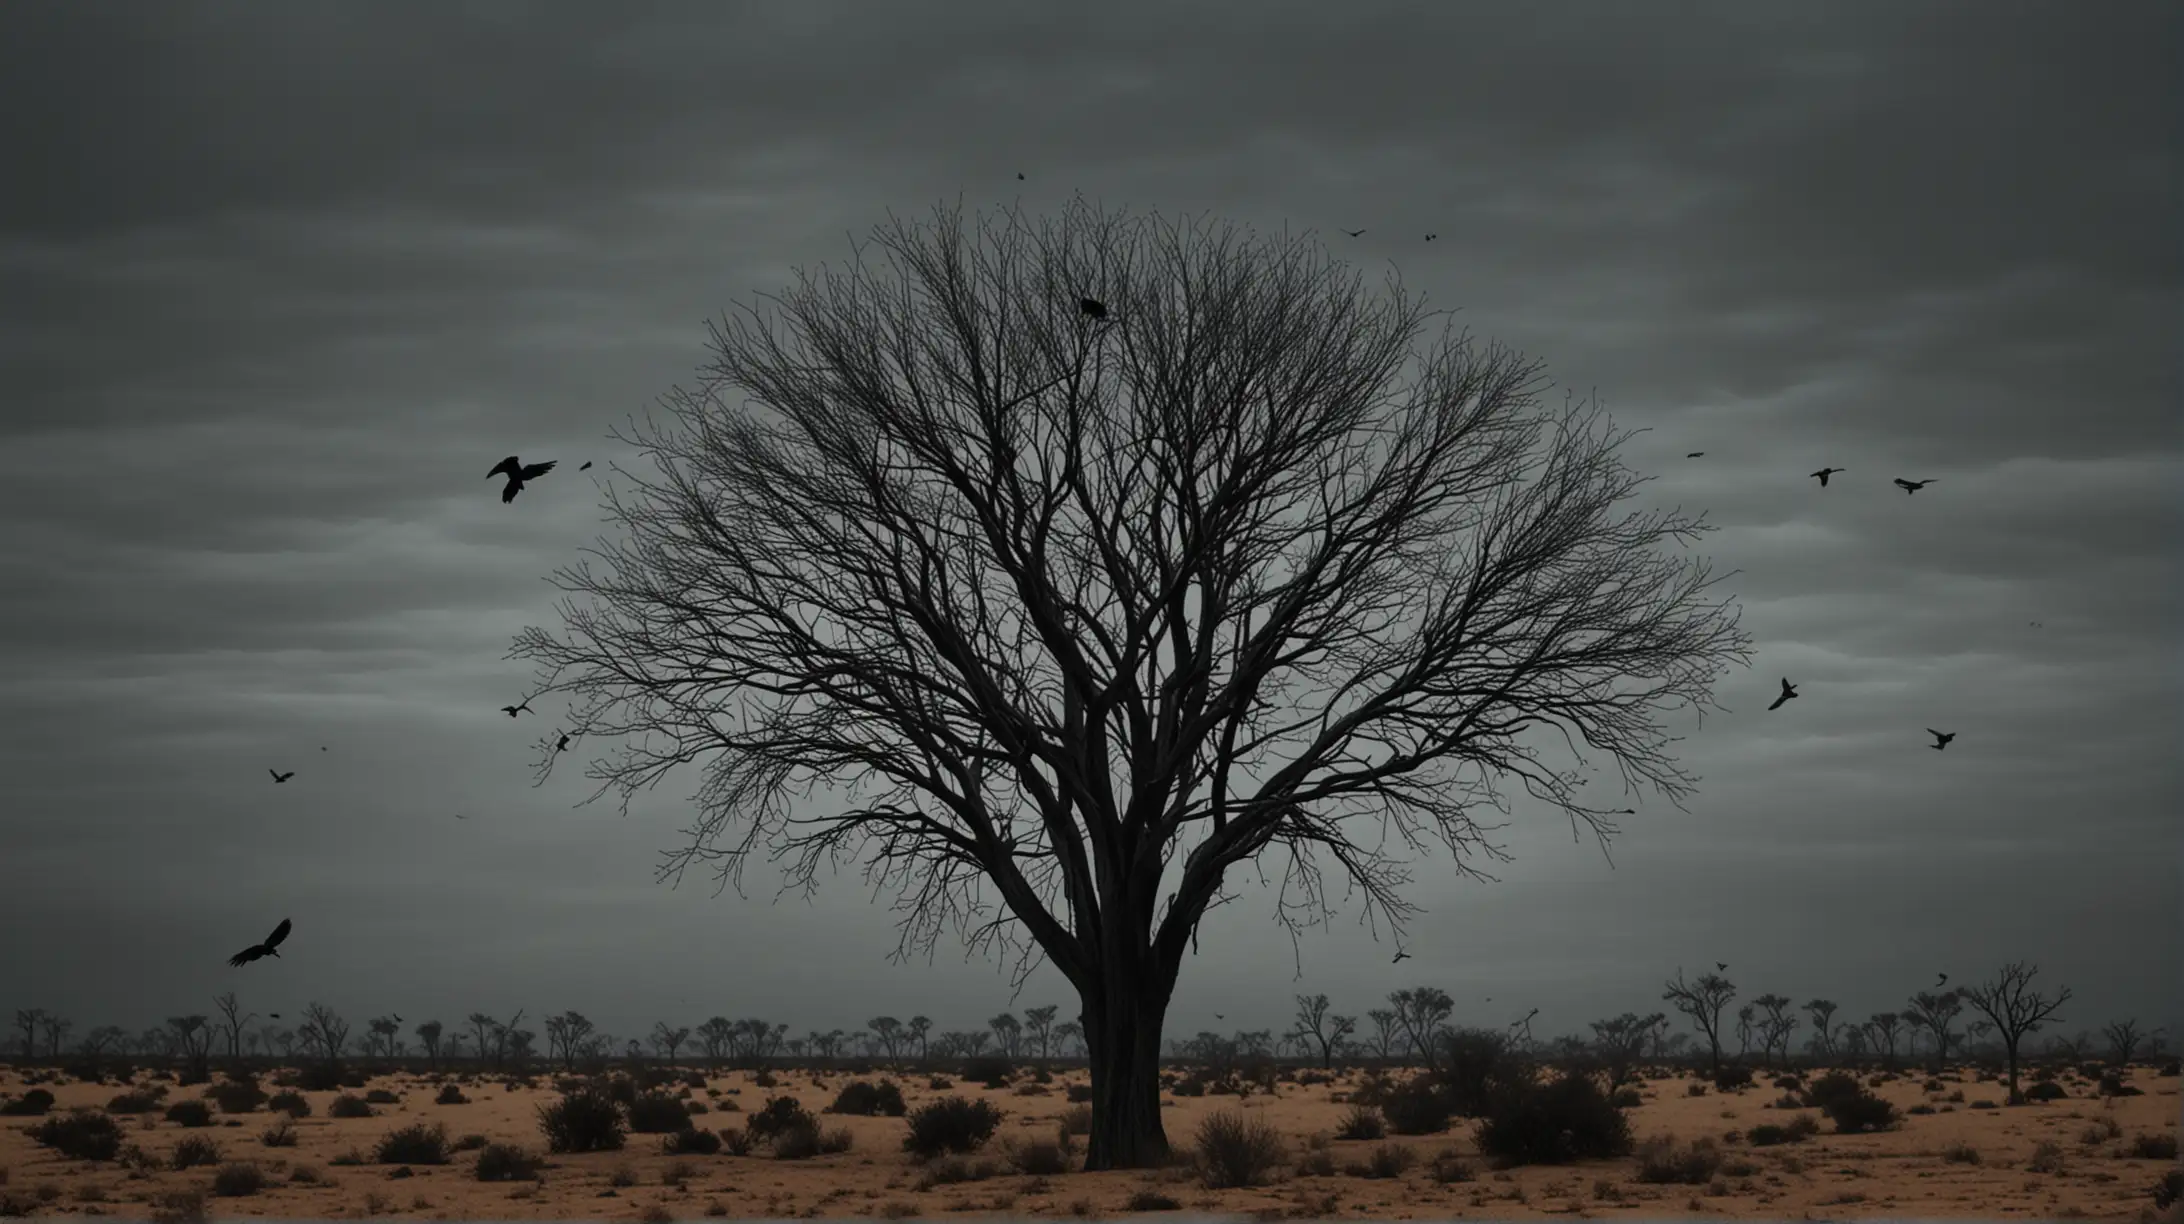 Eerie Night Scene with Realistic Dry Tree and Flying Birds